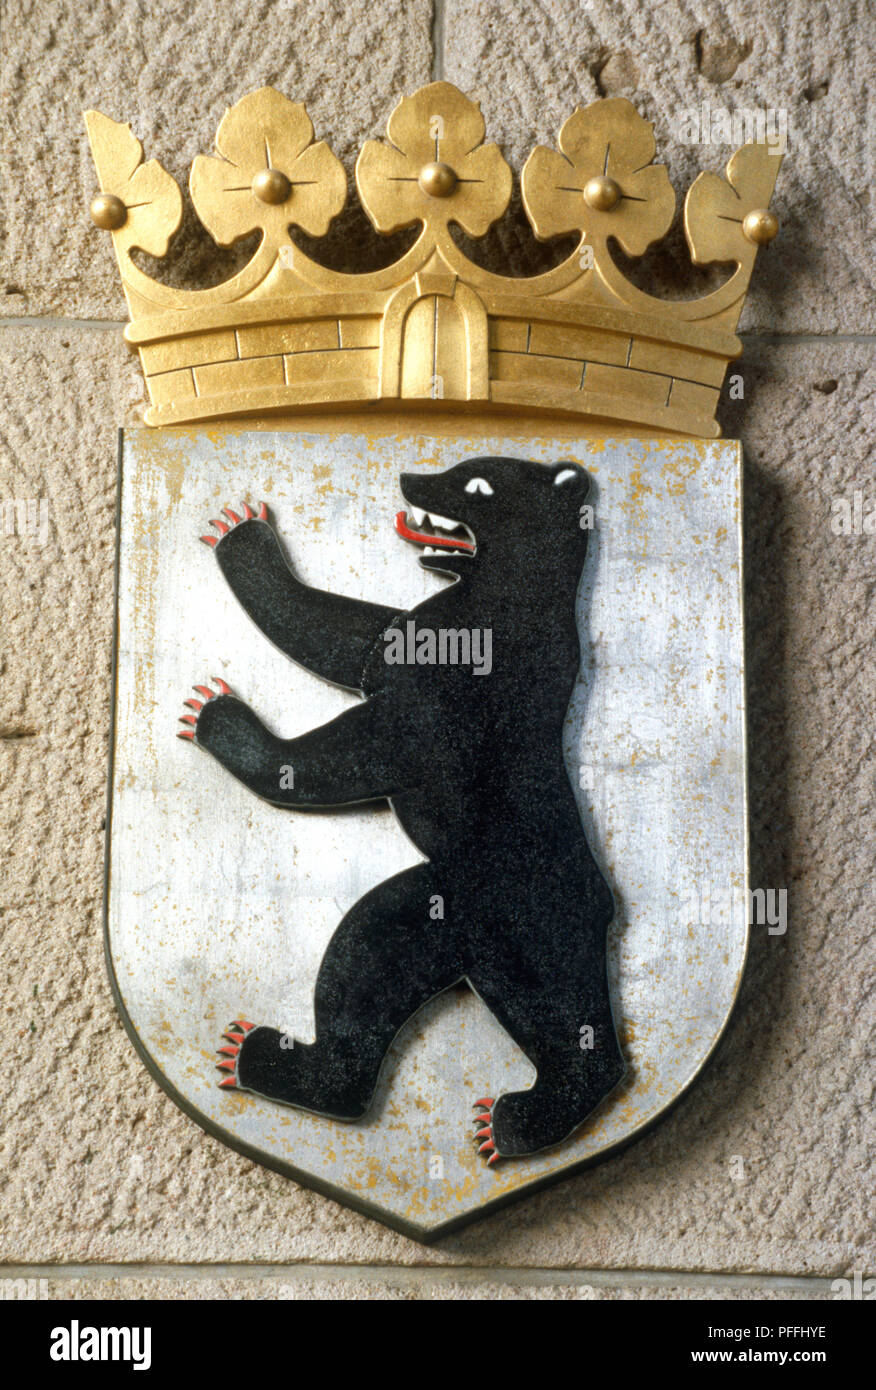 Germany, Berlin, Berlin's coat of arms depicting a black bear with a gold crown above Stock Photo